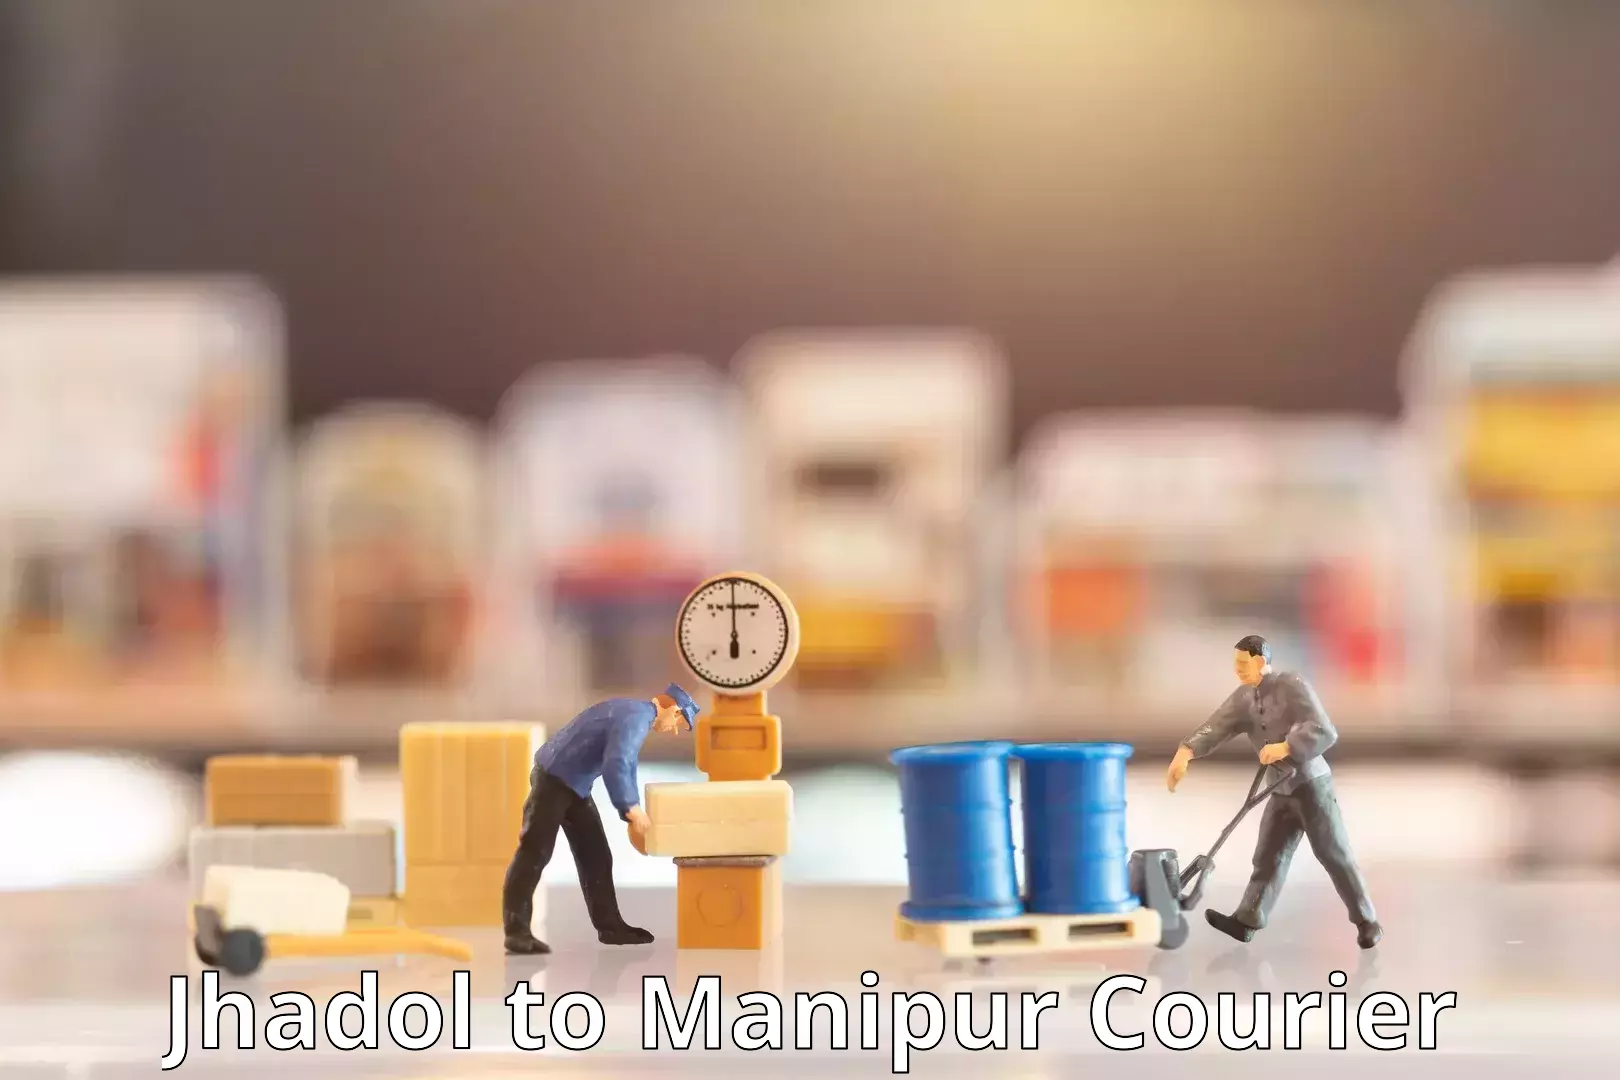 On-call courier service Jhadol to Manipur